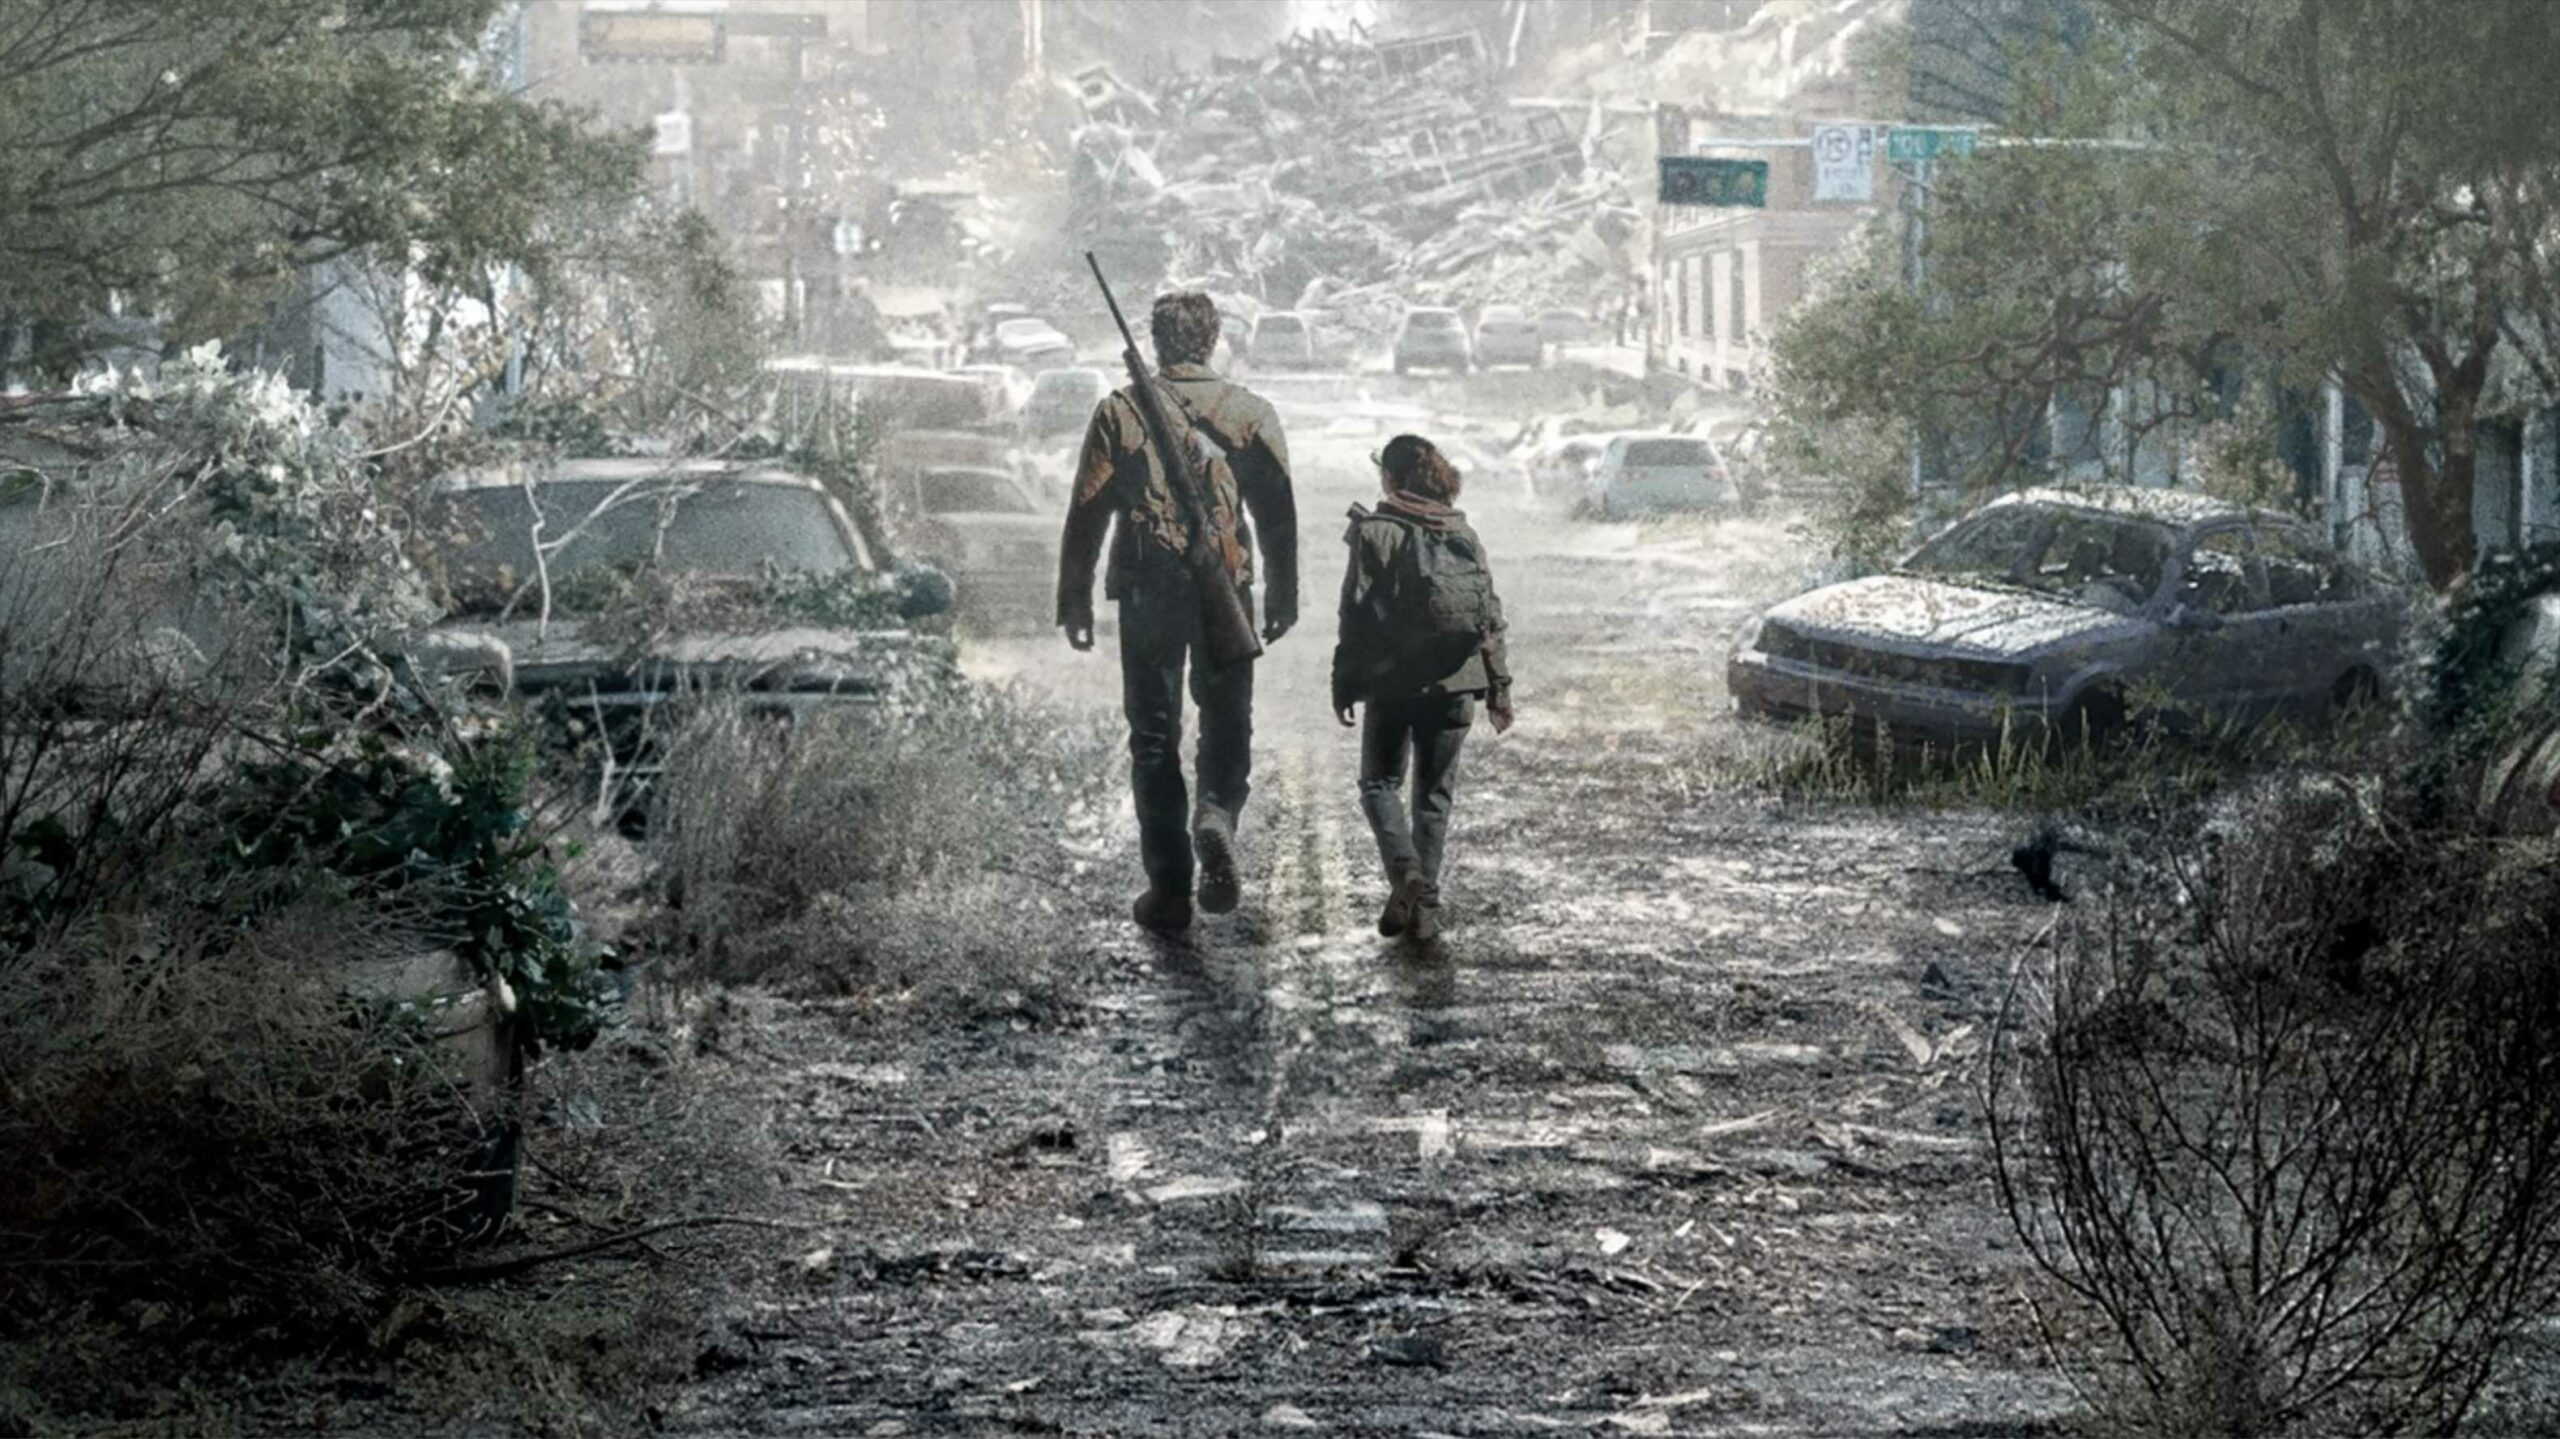 HBO Max Raises Price Just Days Before 'The Last of Us' Premiere